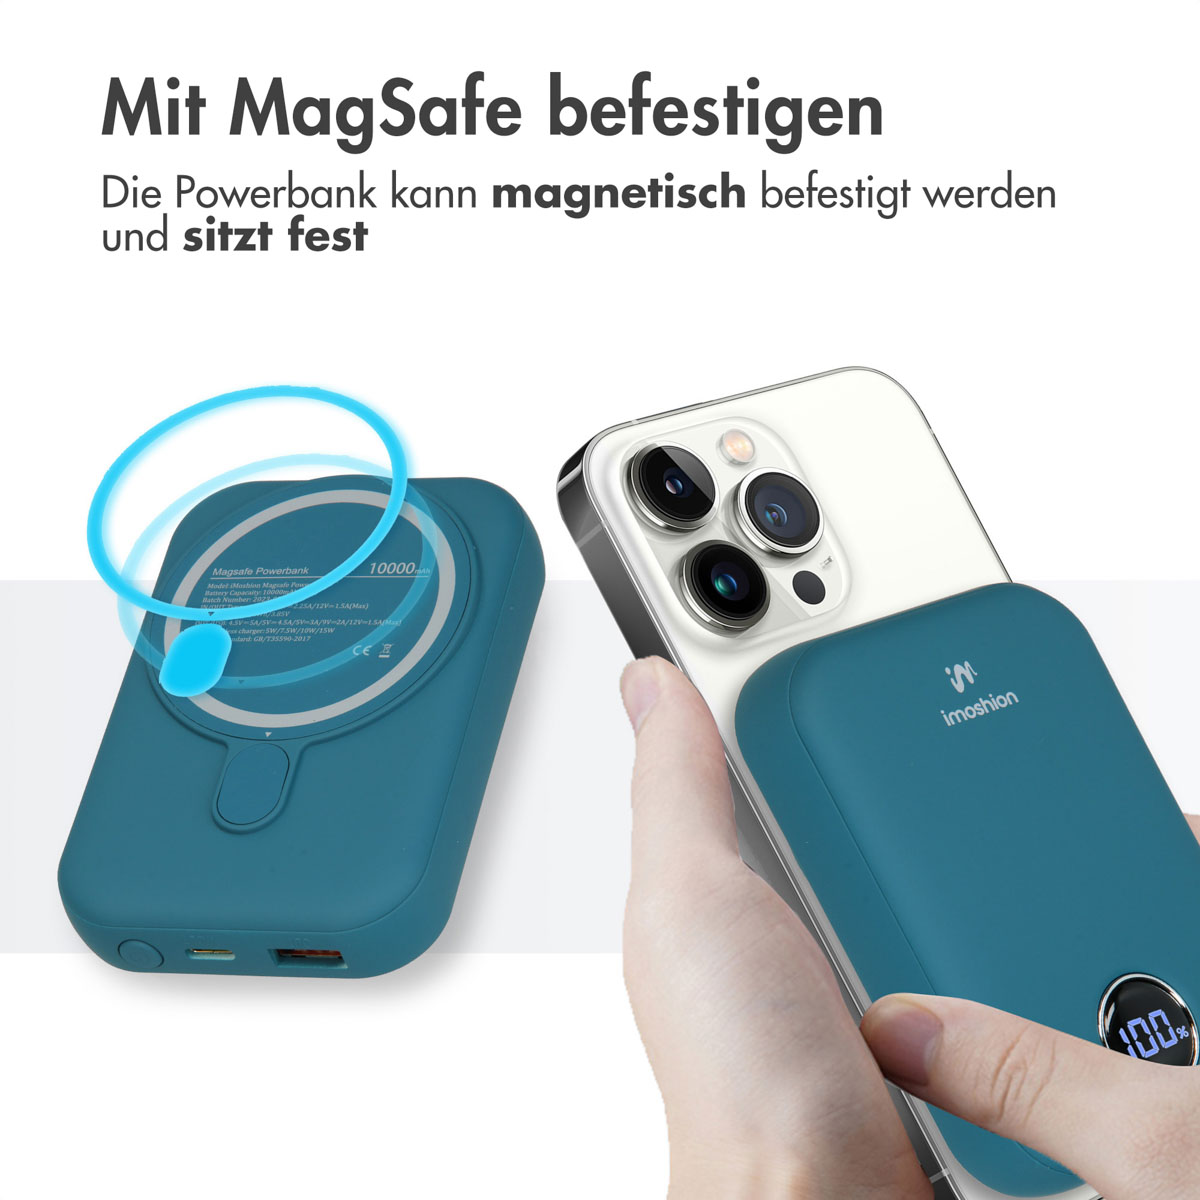 IMOSHION Power 10000 mAh Delivery MagSafe Blau Powerbank Quick Charge 